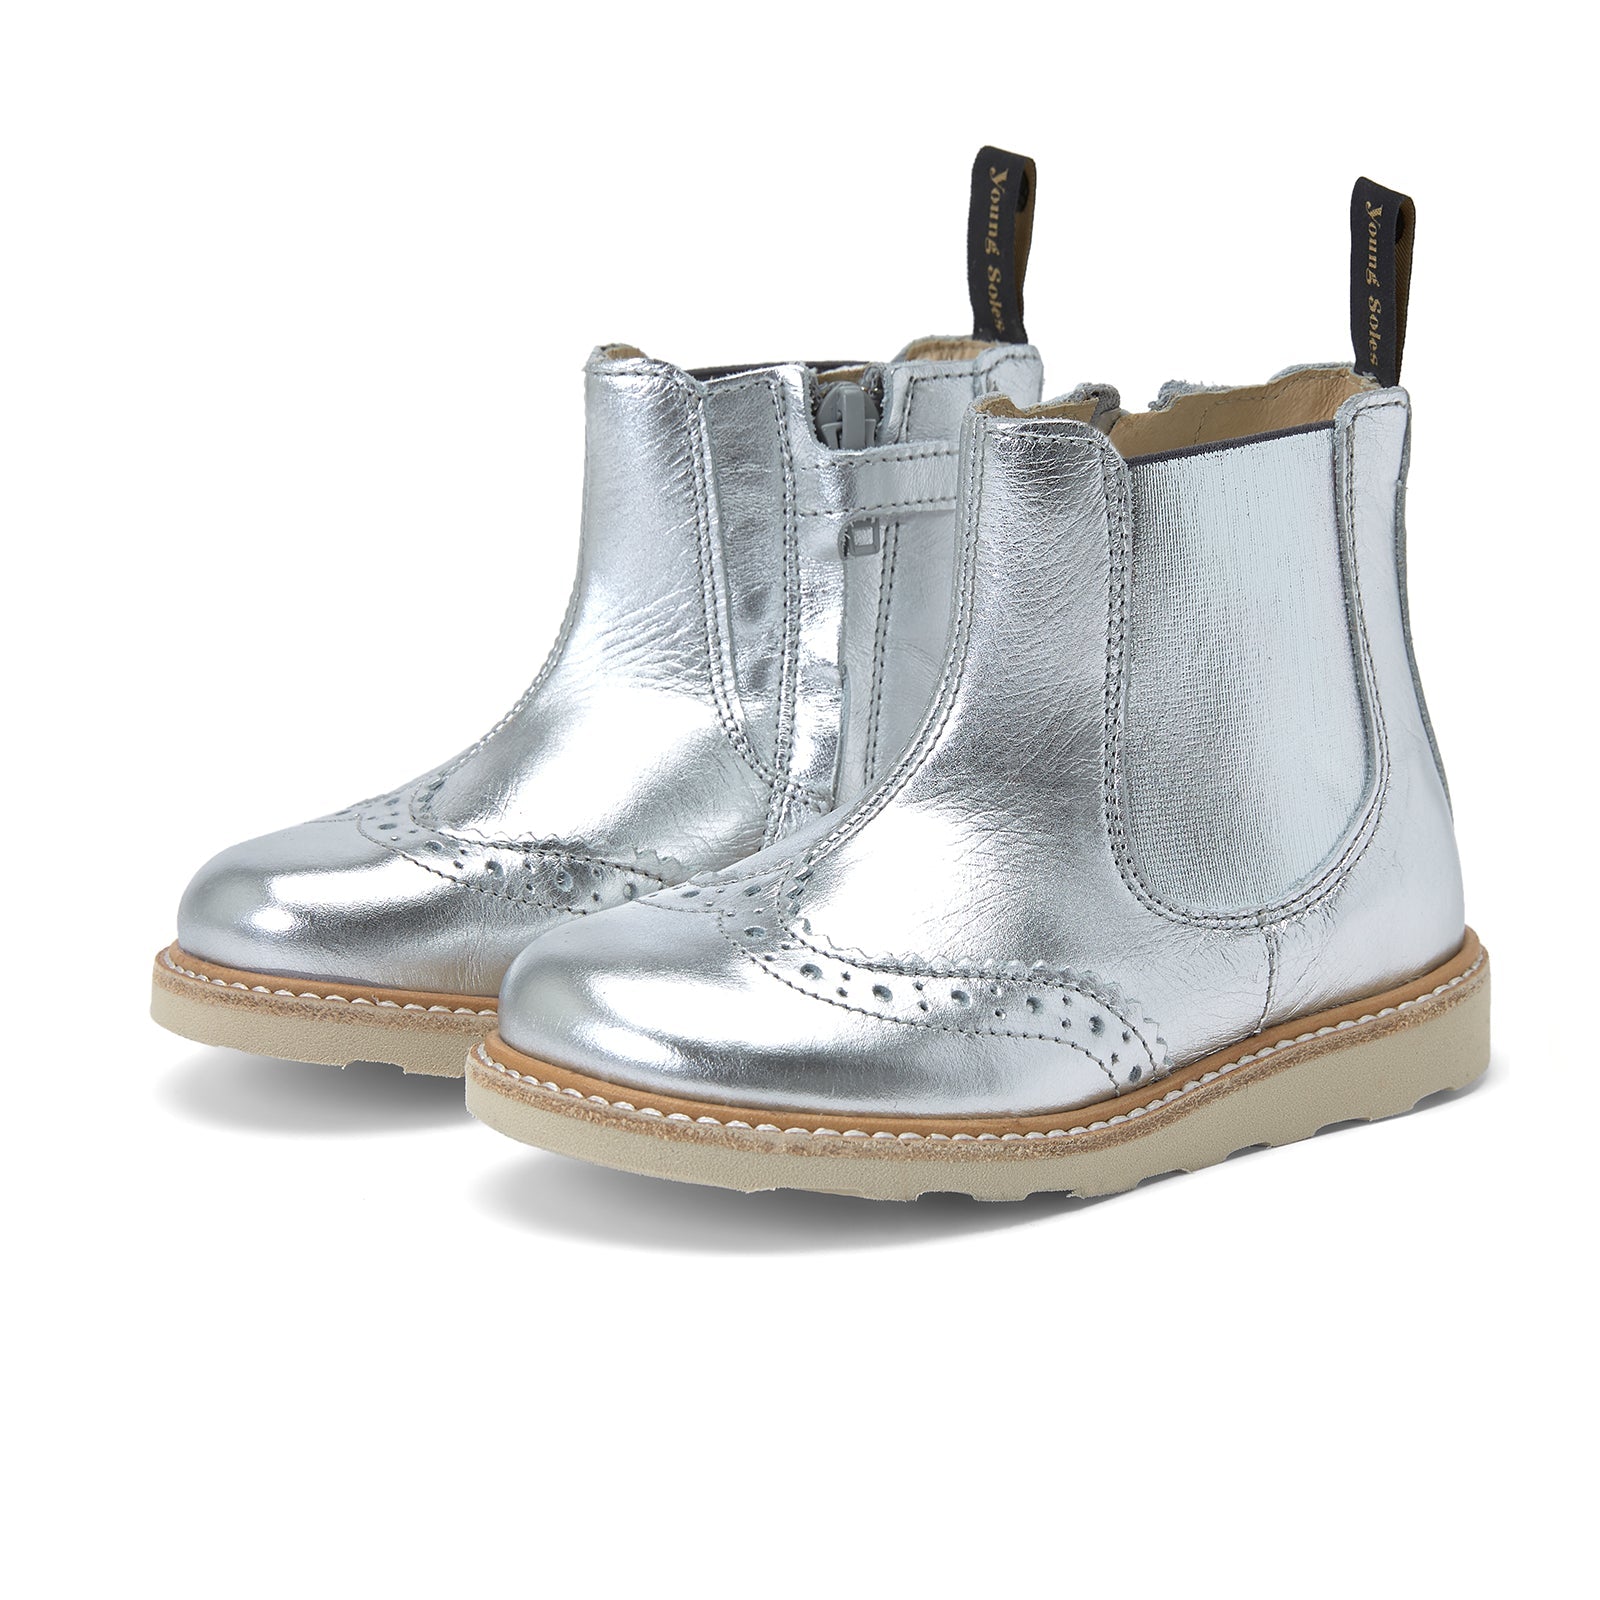 Young Soles Francis Chelsea Boots - Silver